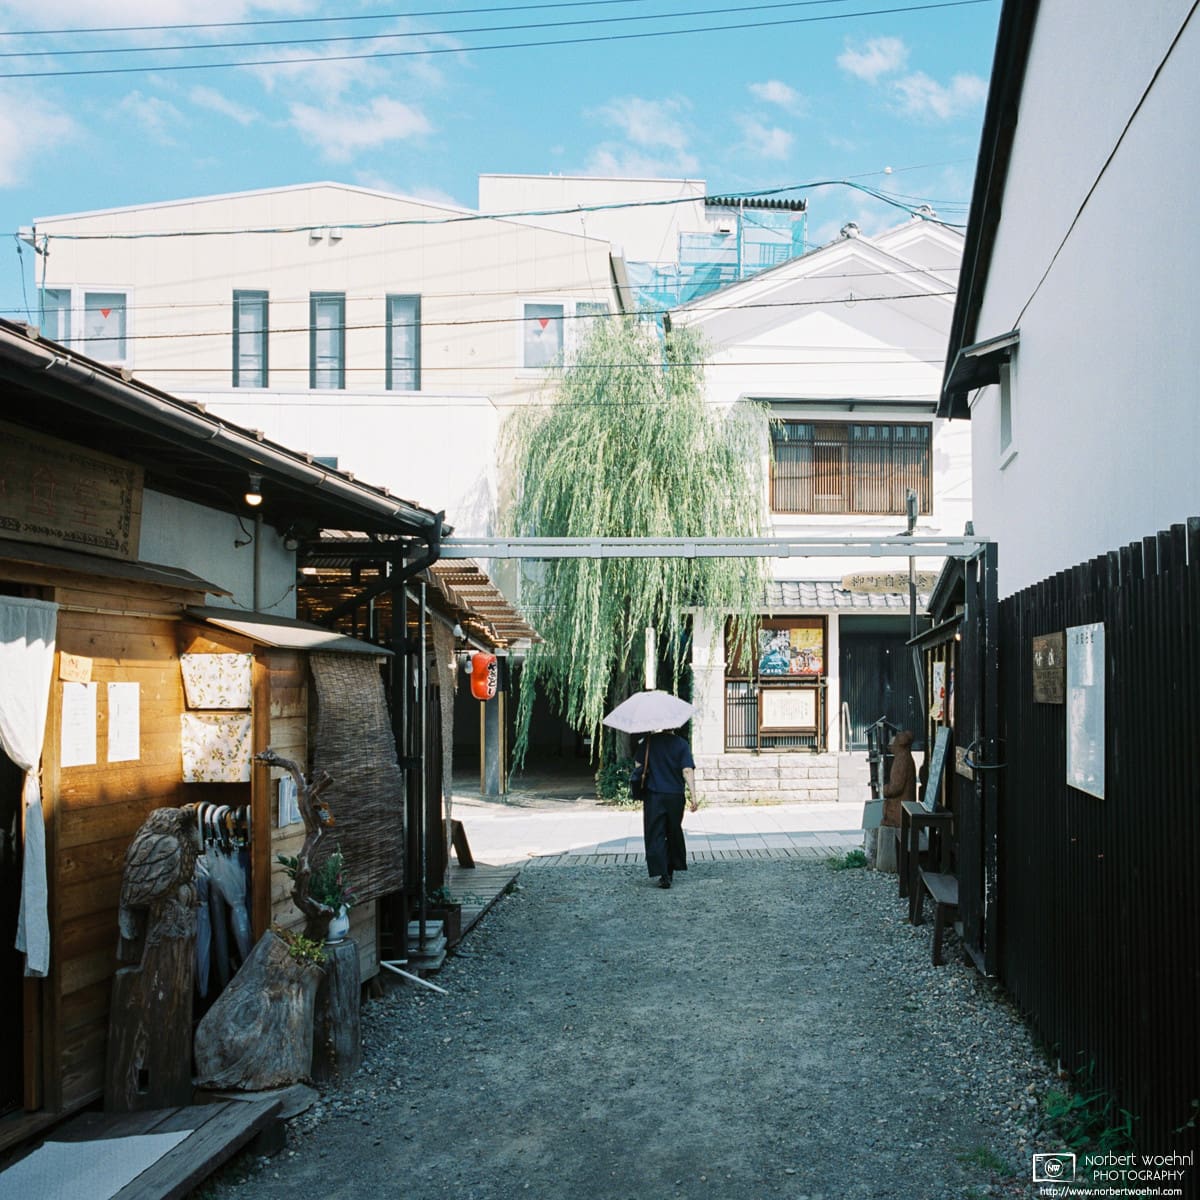 View along a side street of the Yanagimachi district in Ueda, Nagano Prefecture, Japan.